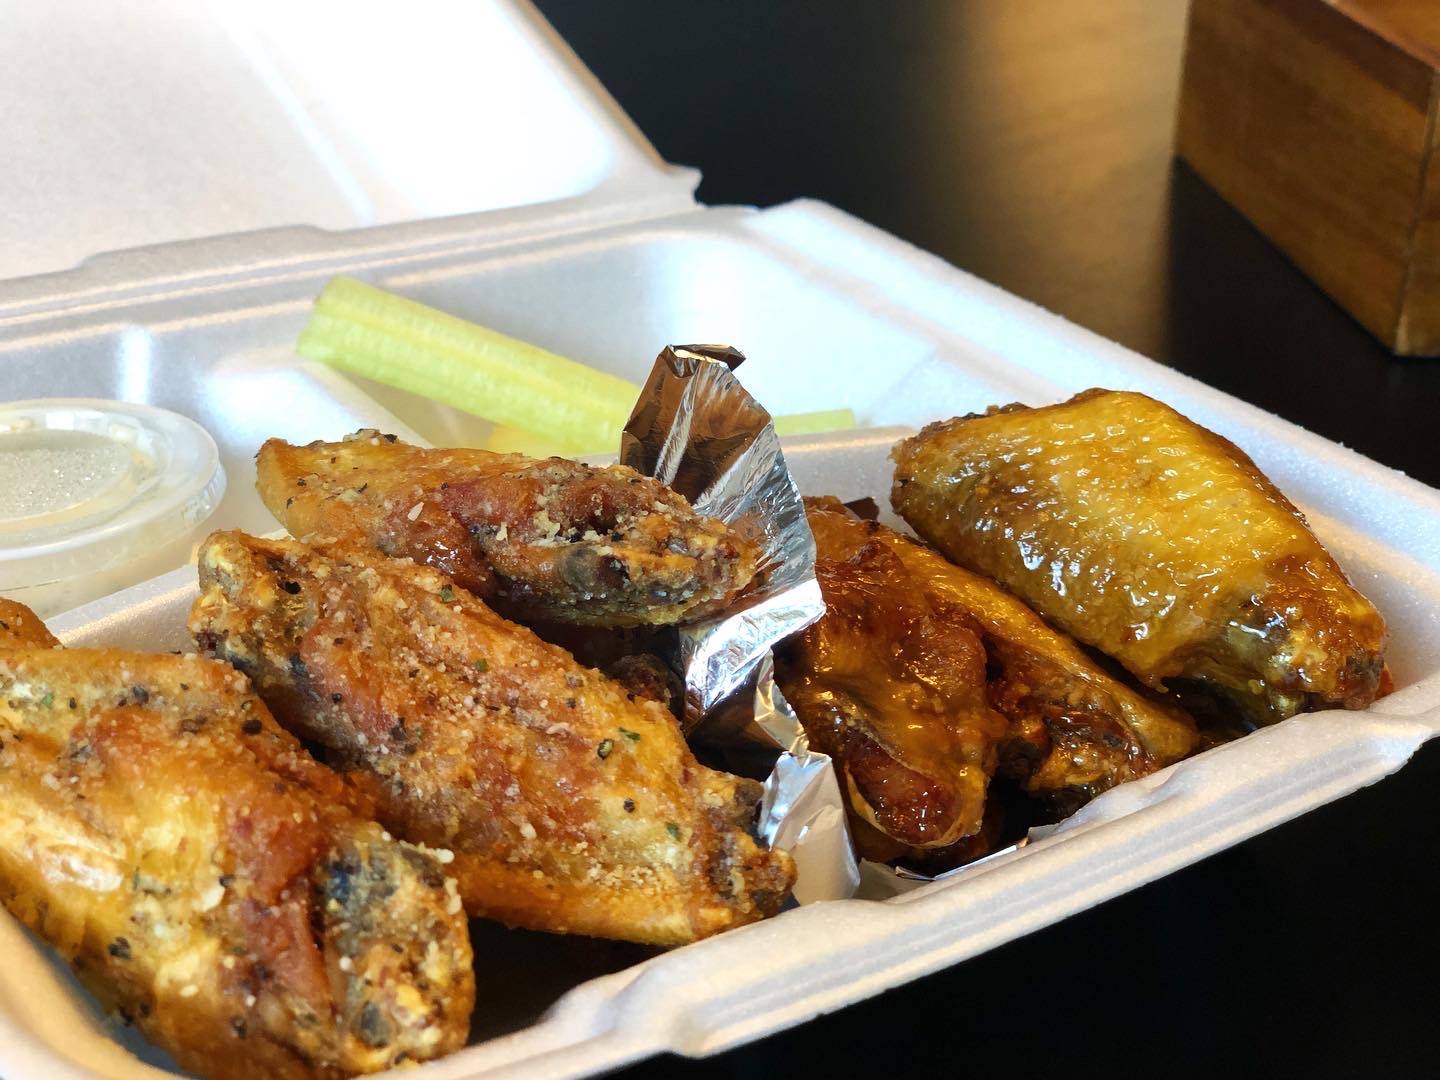 Ten wings with two different sauces inside a styrofoam container. Photo by Alyssa Buckley.